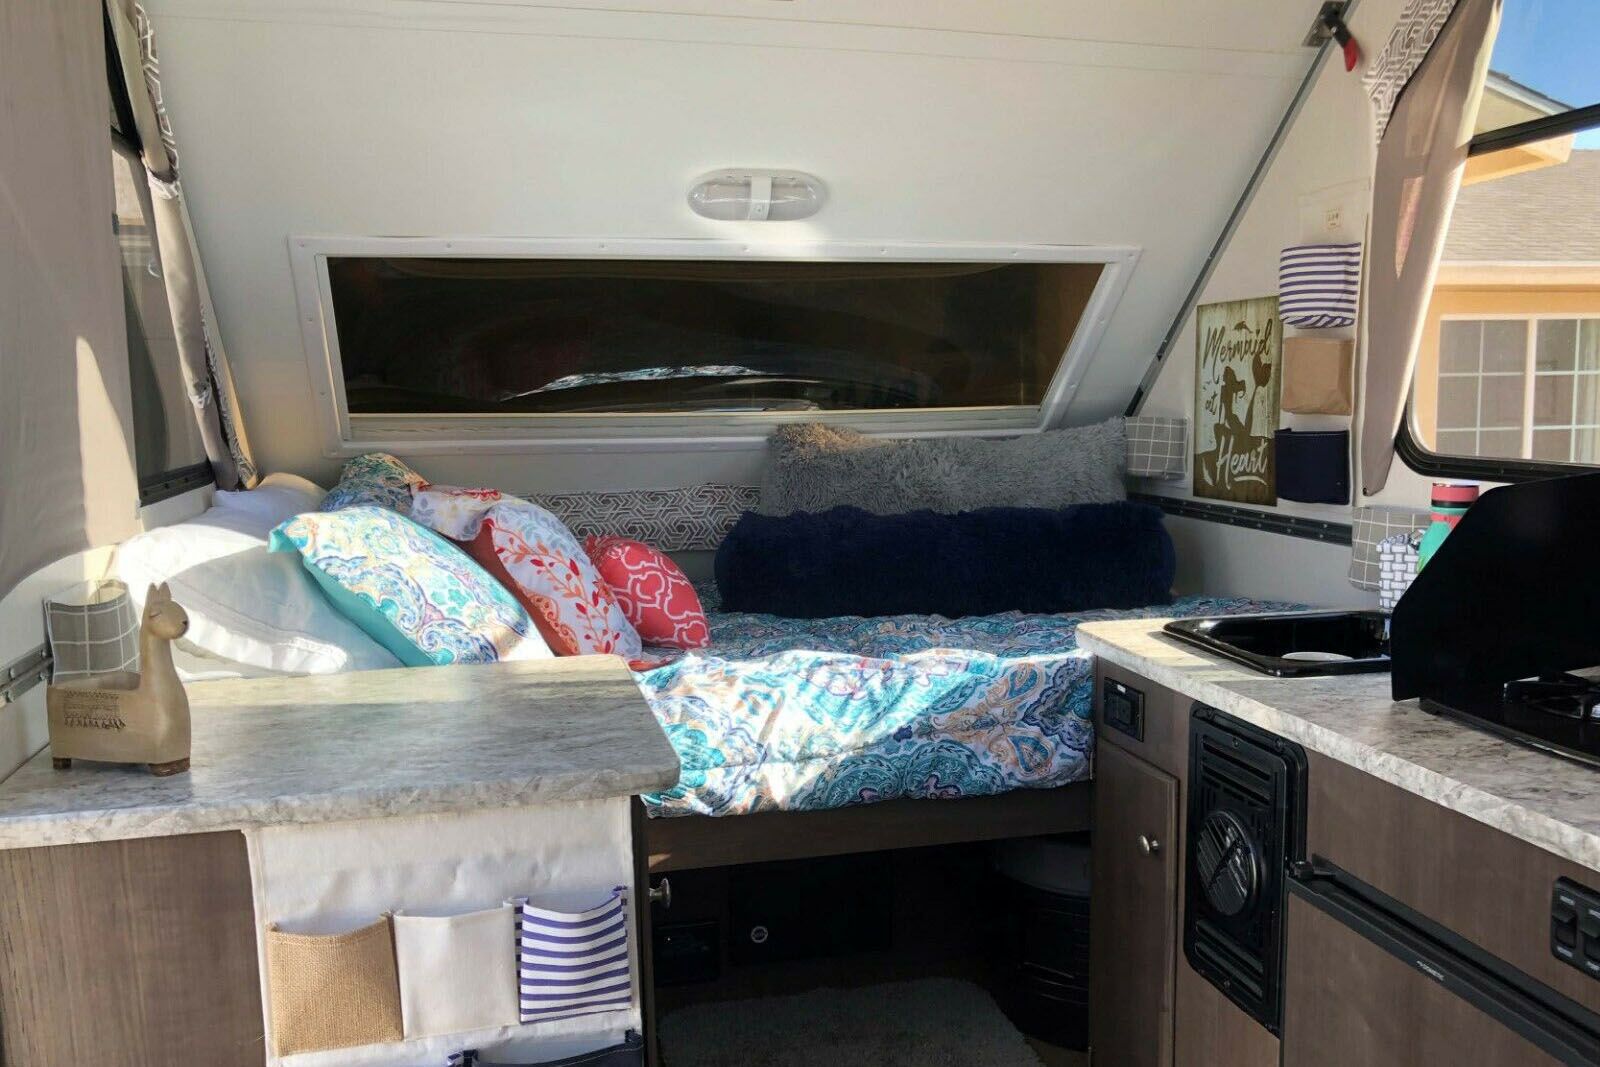 <p>Some models include a refrigerator, microwave, and stove-top. The company also makes a small-footprint, teardrop-like RV camper called the <a href="https://aliner.com/ascape-campers/">Ascape</a> with solar panel and flat-screen TV options. Plan to drop at least $29,000 for the latest Ascape models, depending on size and features.</p>